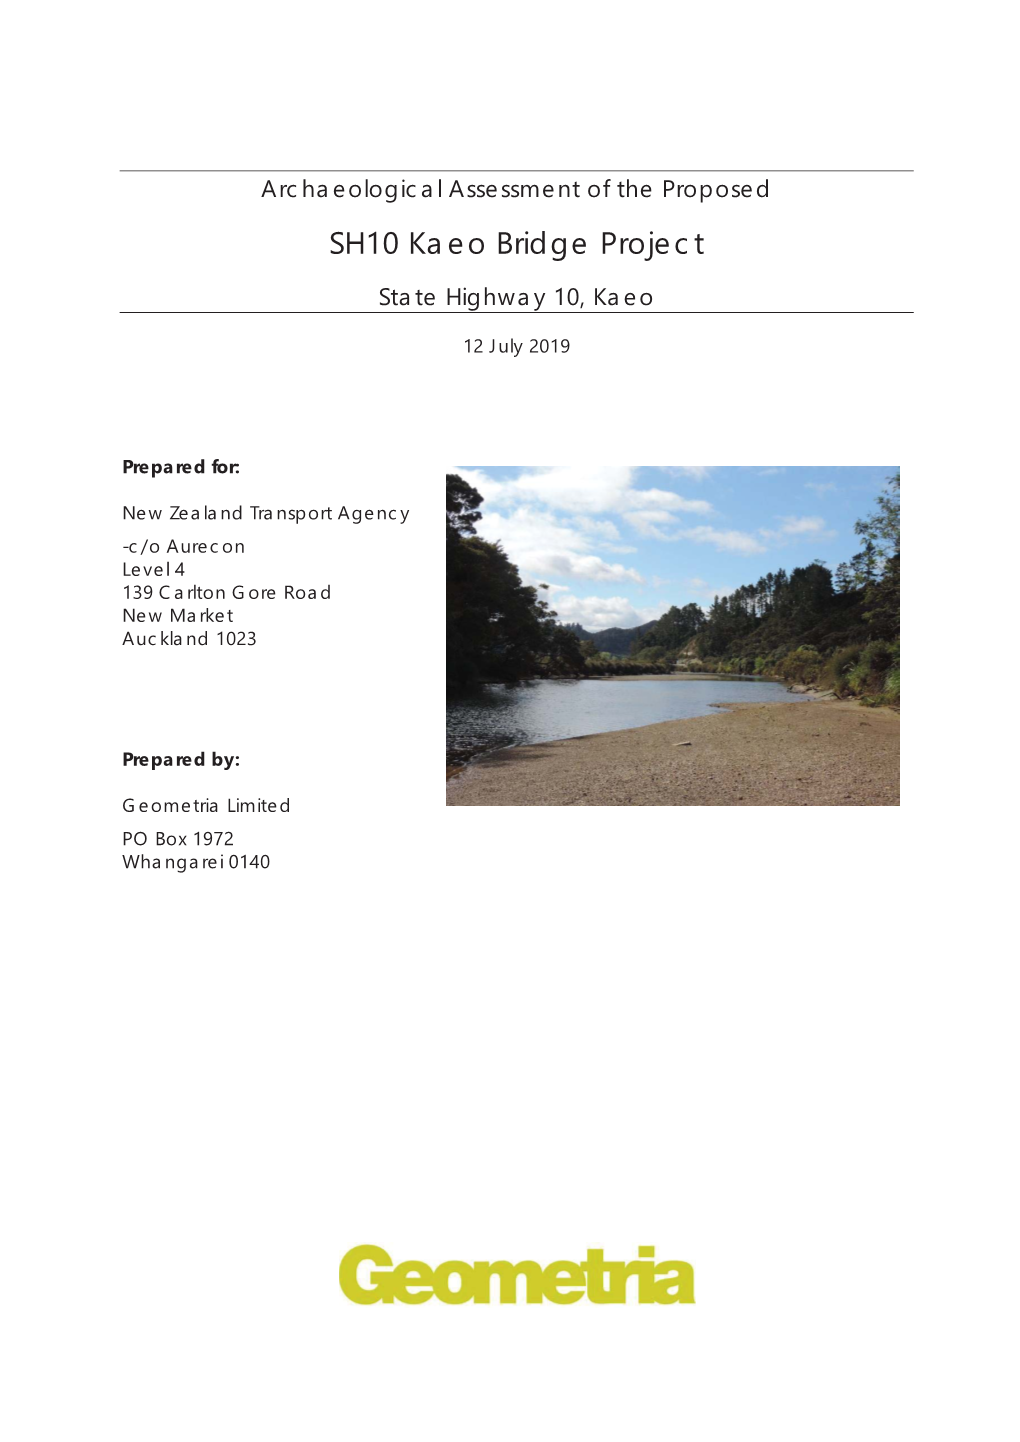 Archaeological Assessment of the Proposed SH10 Kaeo Bridge Project